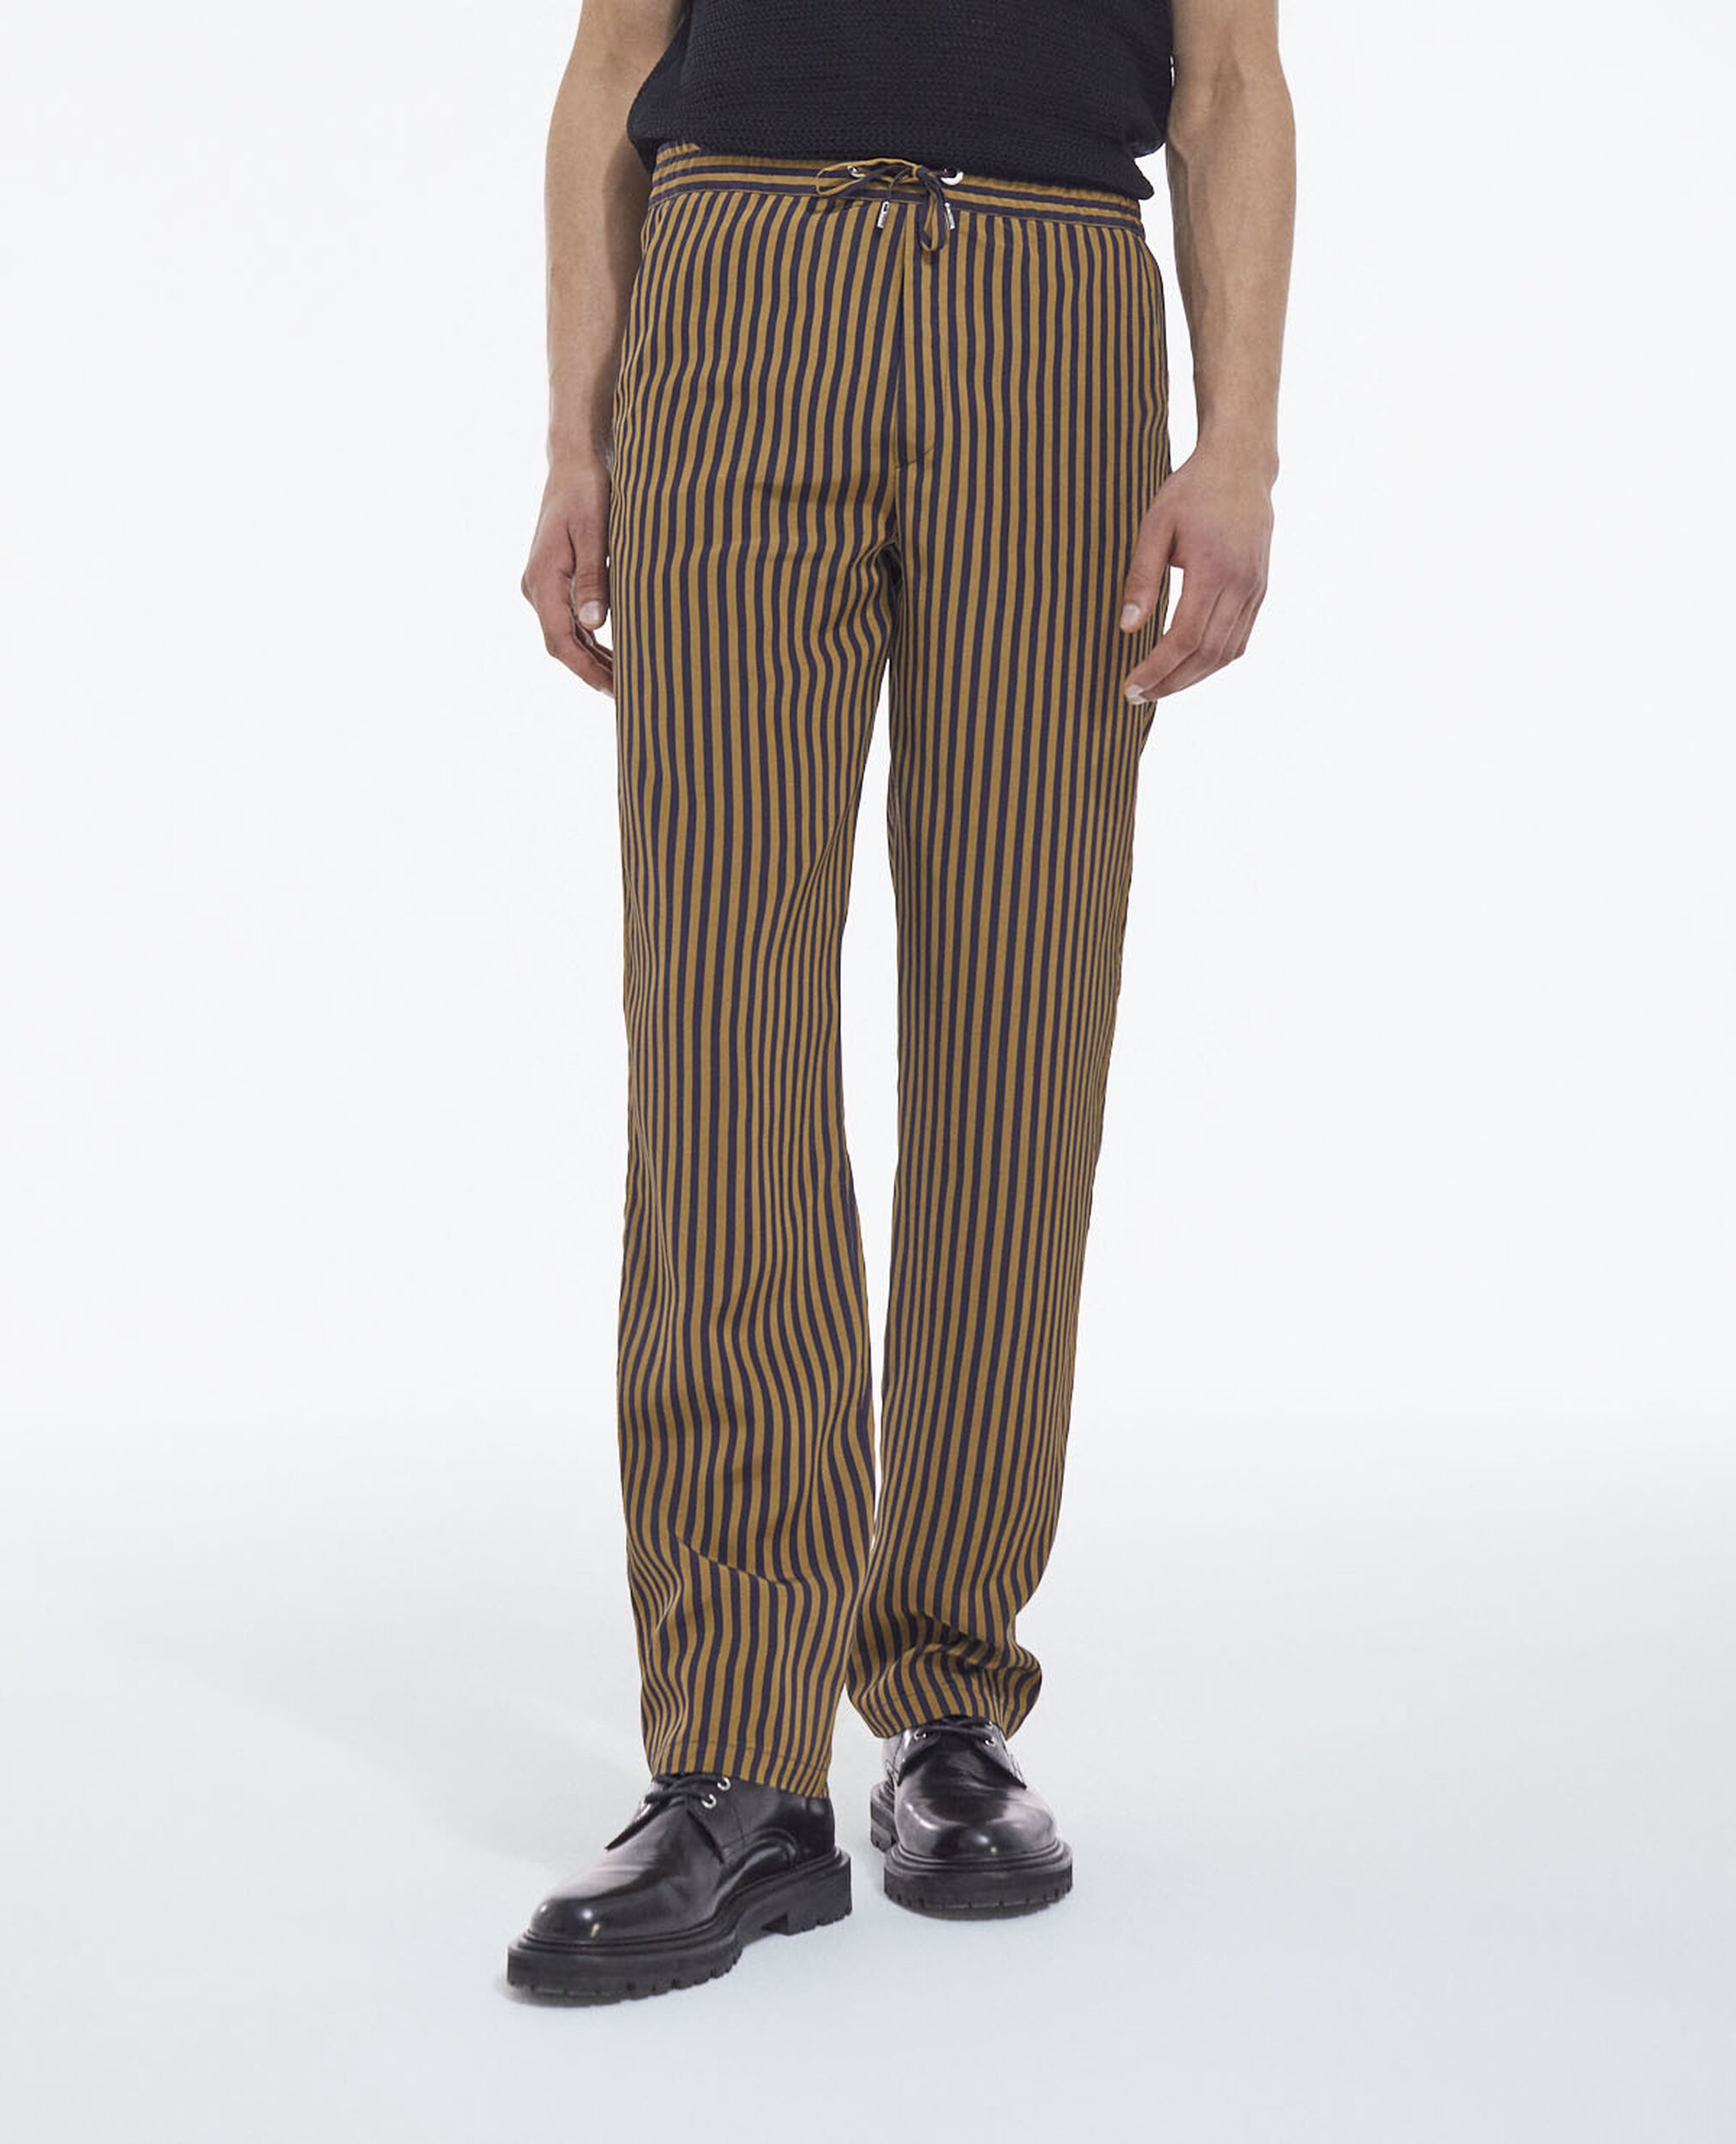 Flowing straight-cut striped blue pants, NAVY / BROWN, hi-res image number null